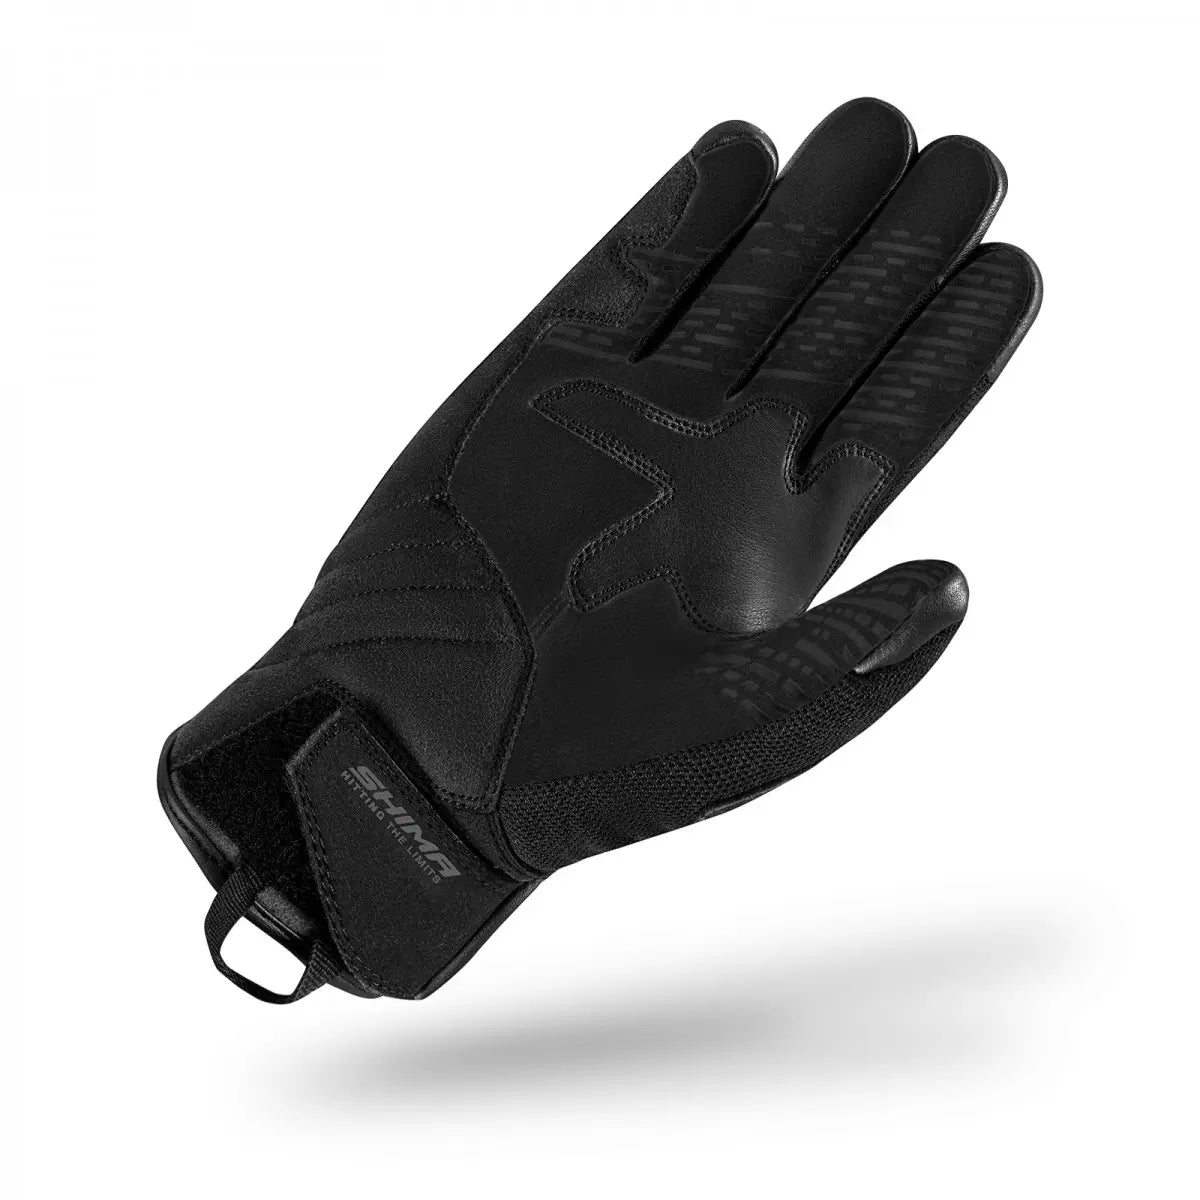 a palm of black lady motorcycle glove from Shima 